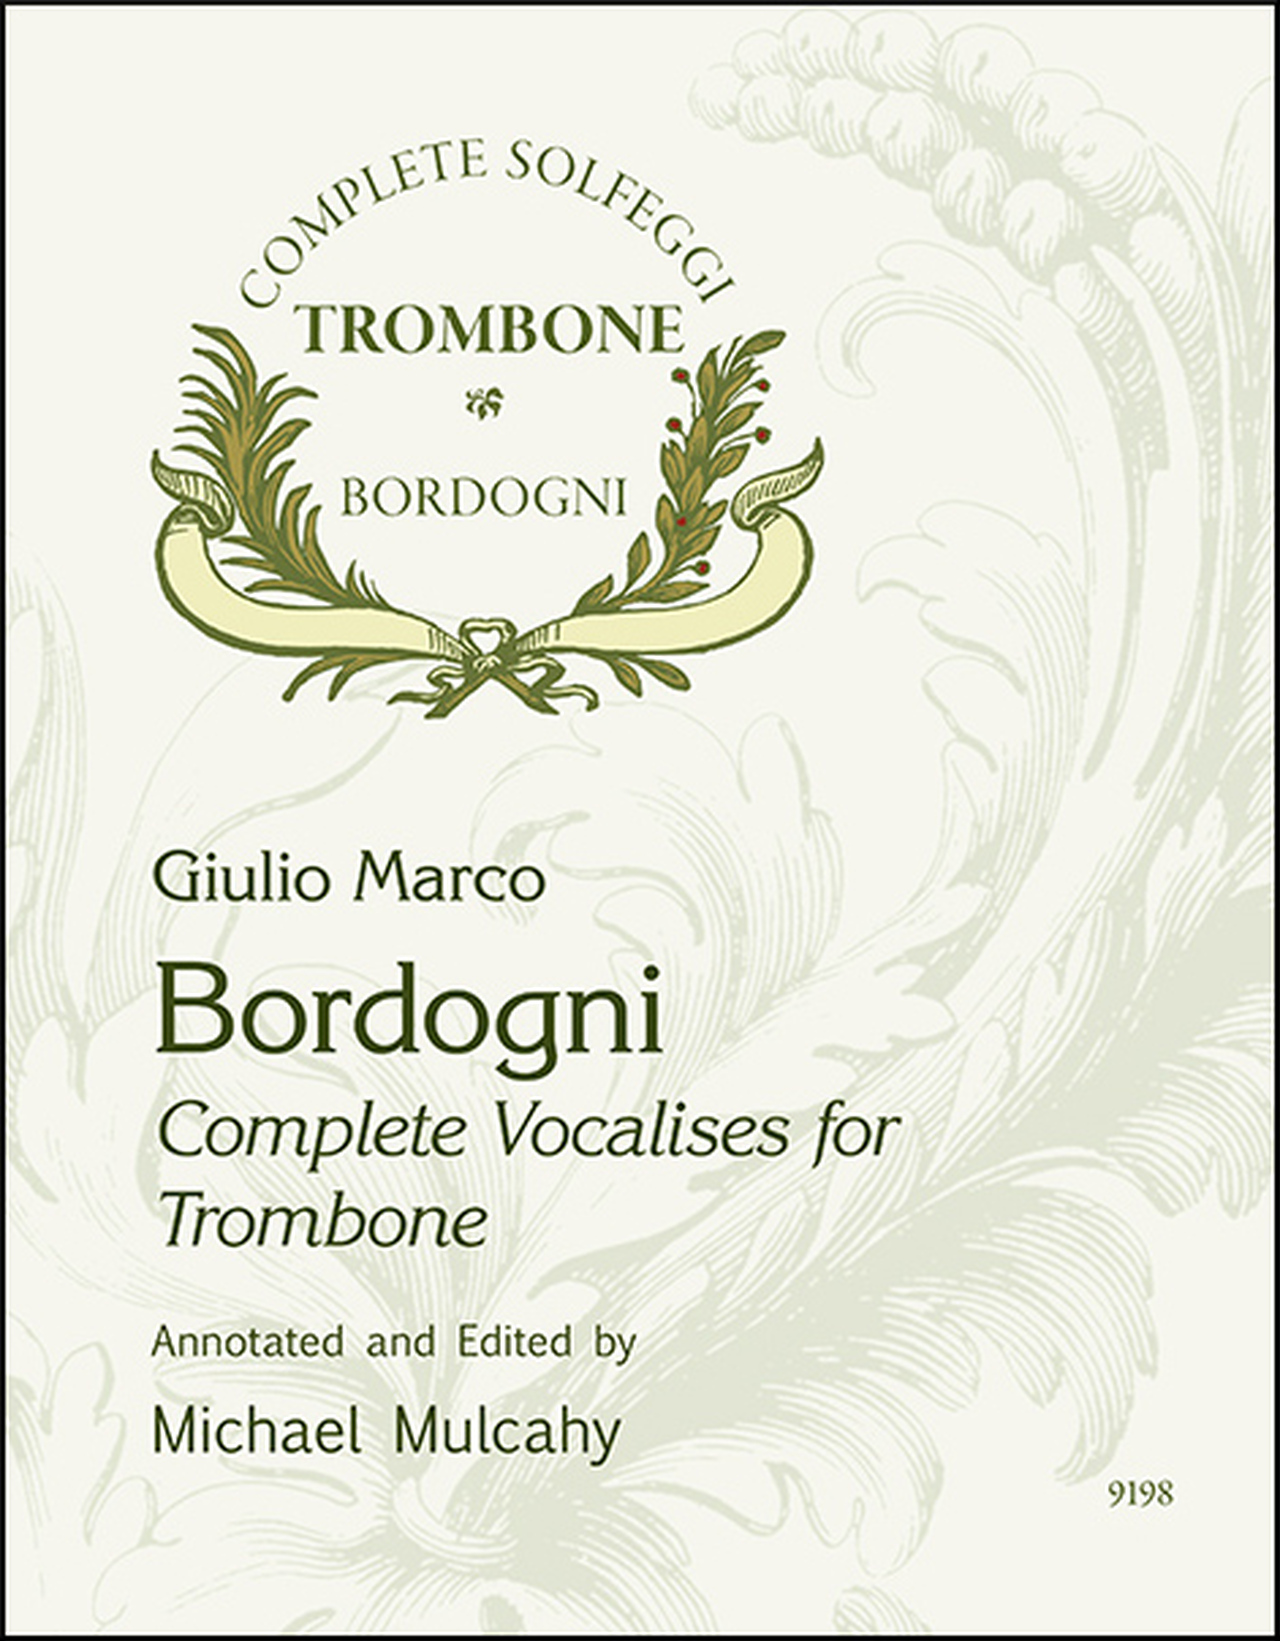 The Complete Solfeggi by Marco Bordogni, edited by Michael Mulcahy